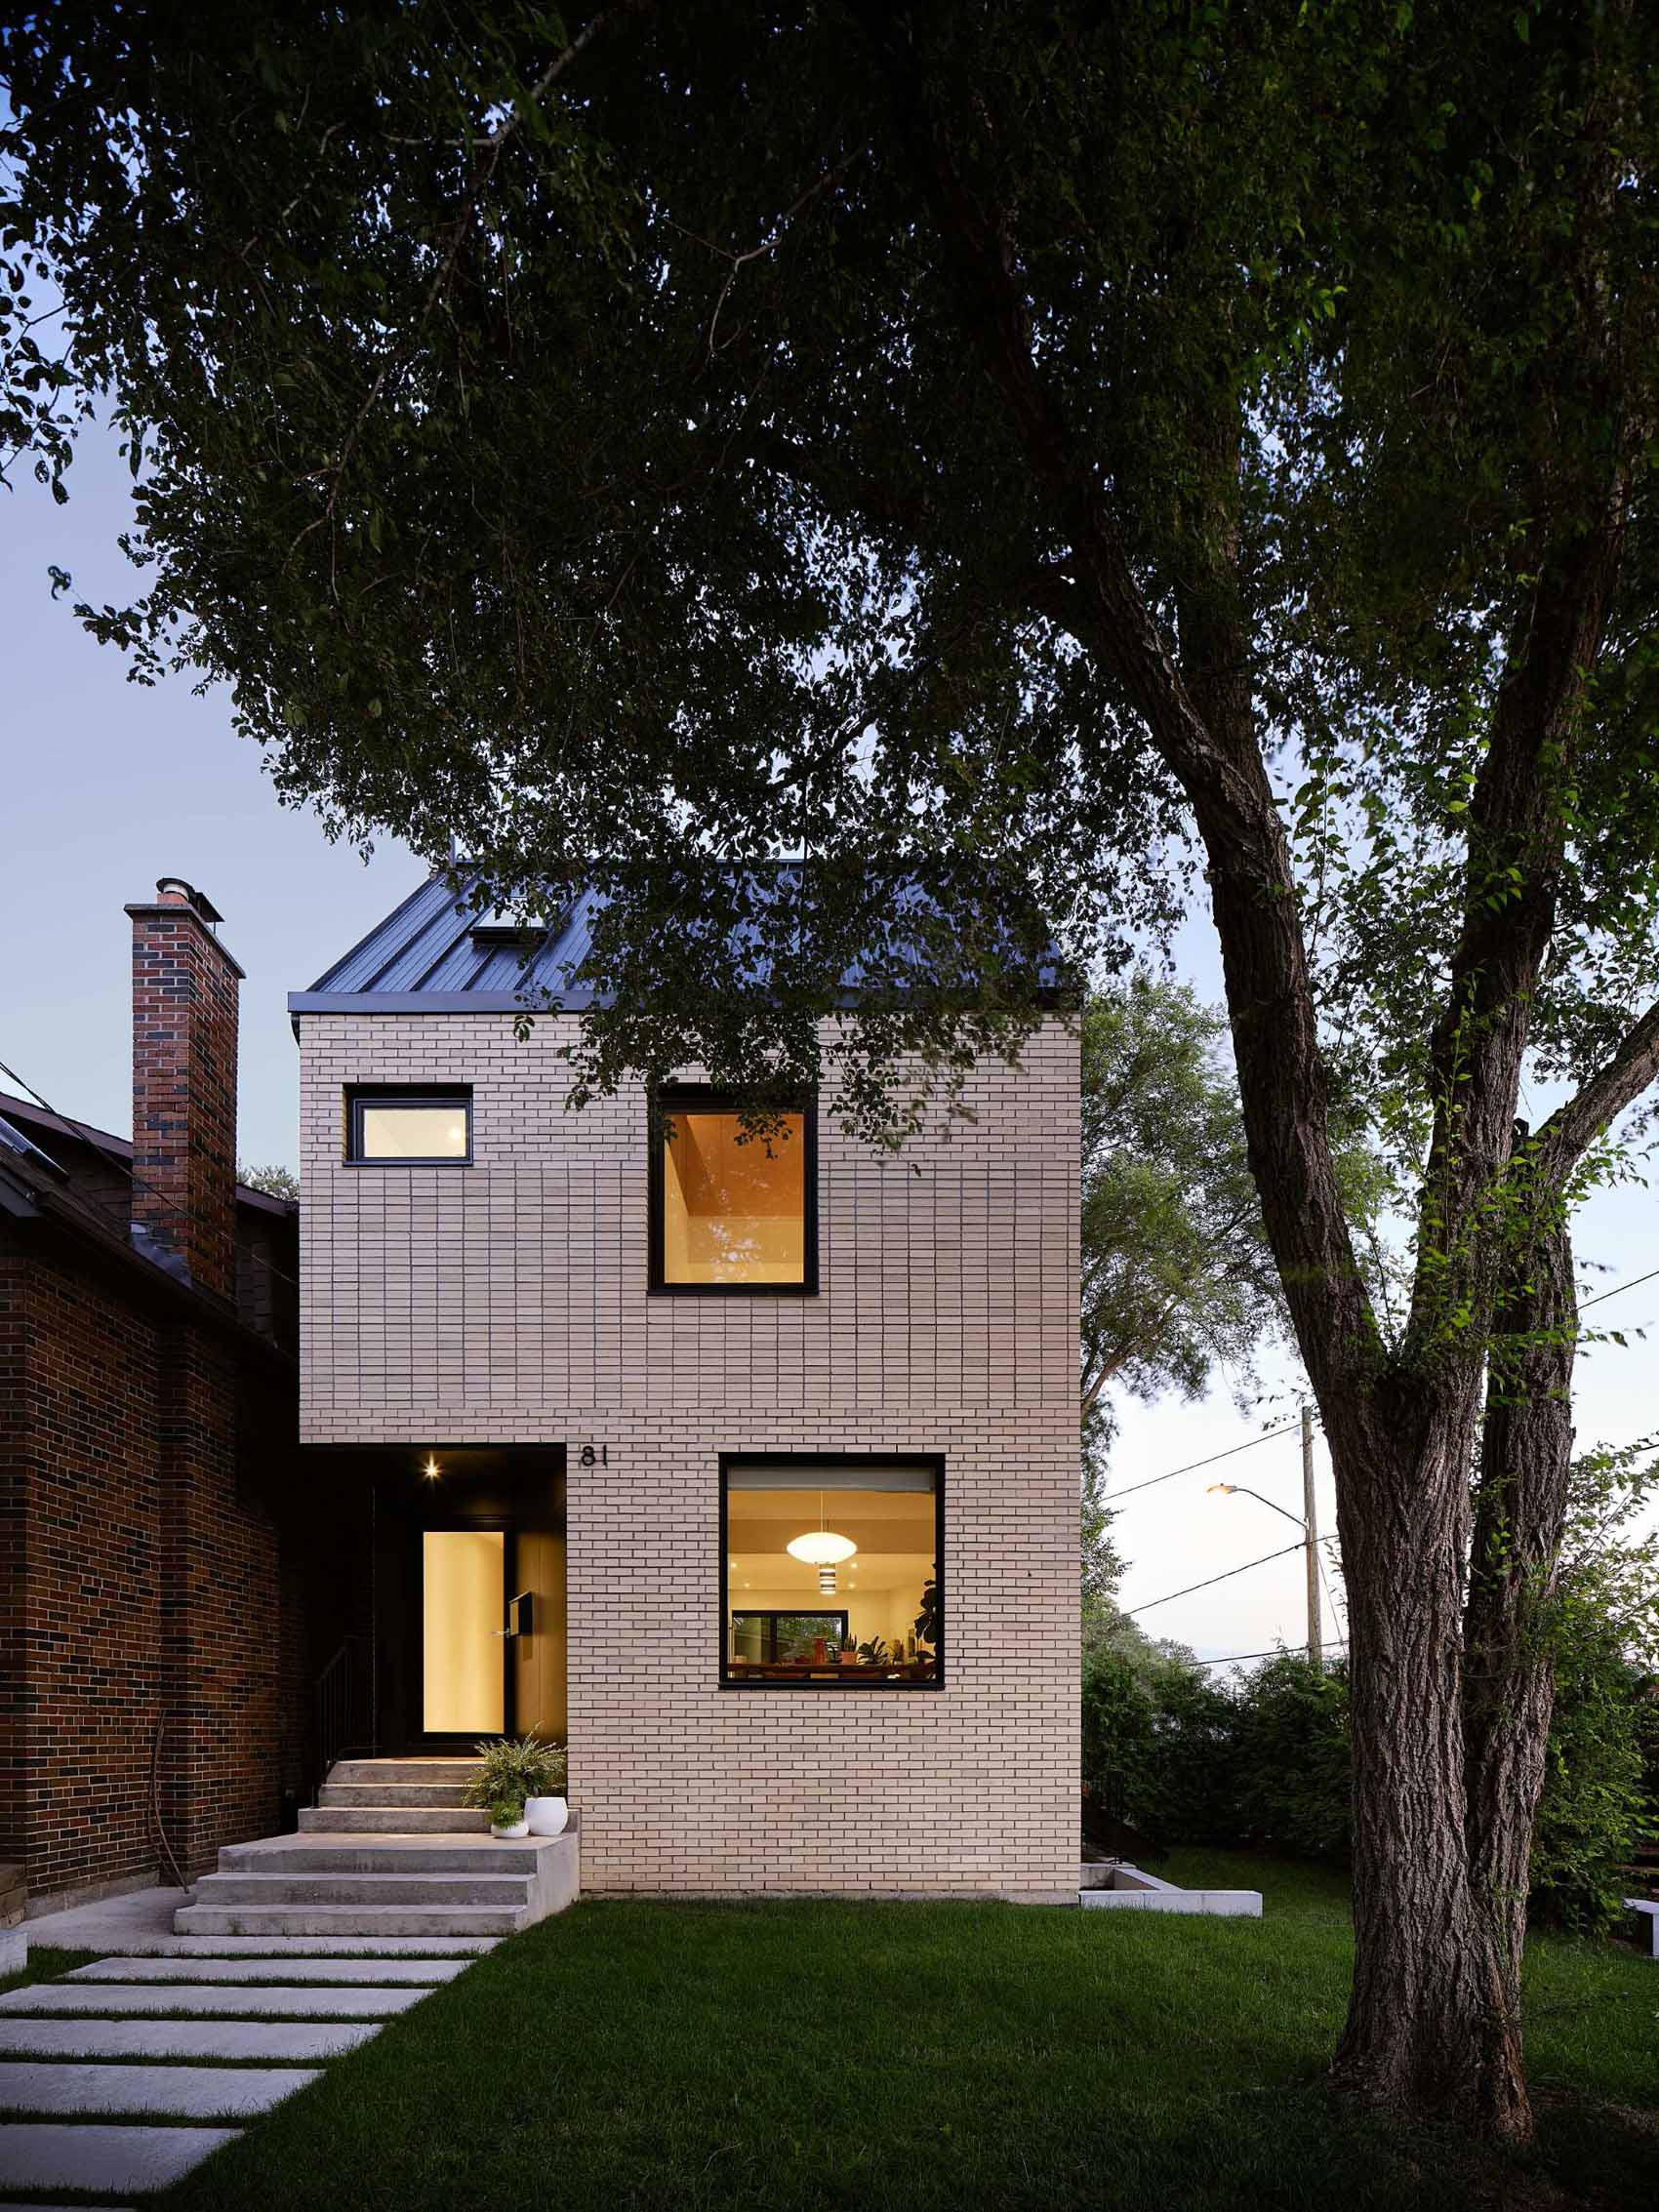 The exterior of this modern home is clad in old historical buff yellow brick in varying banded coursing patterns that feature across the facades.